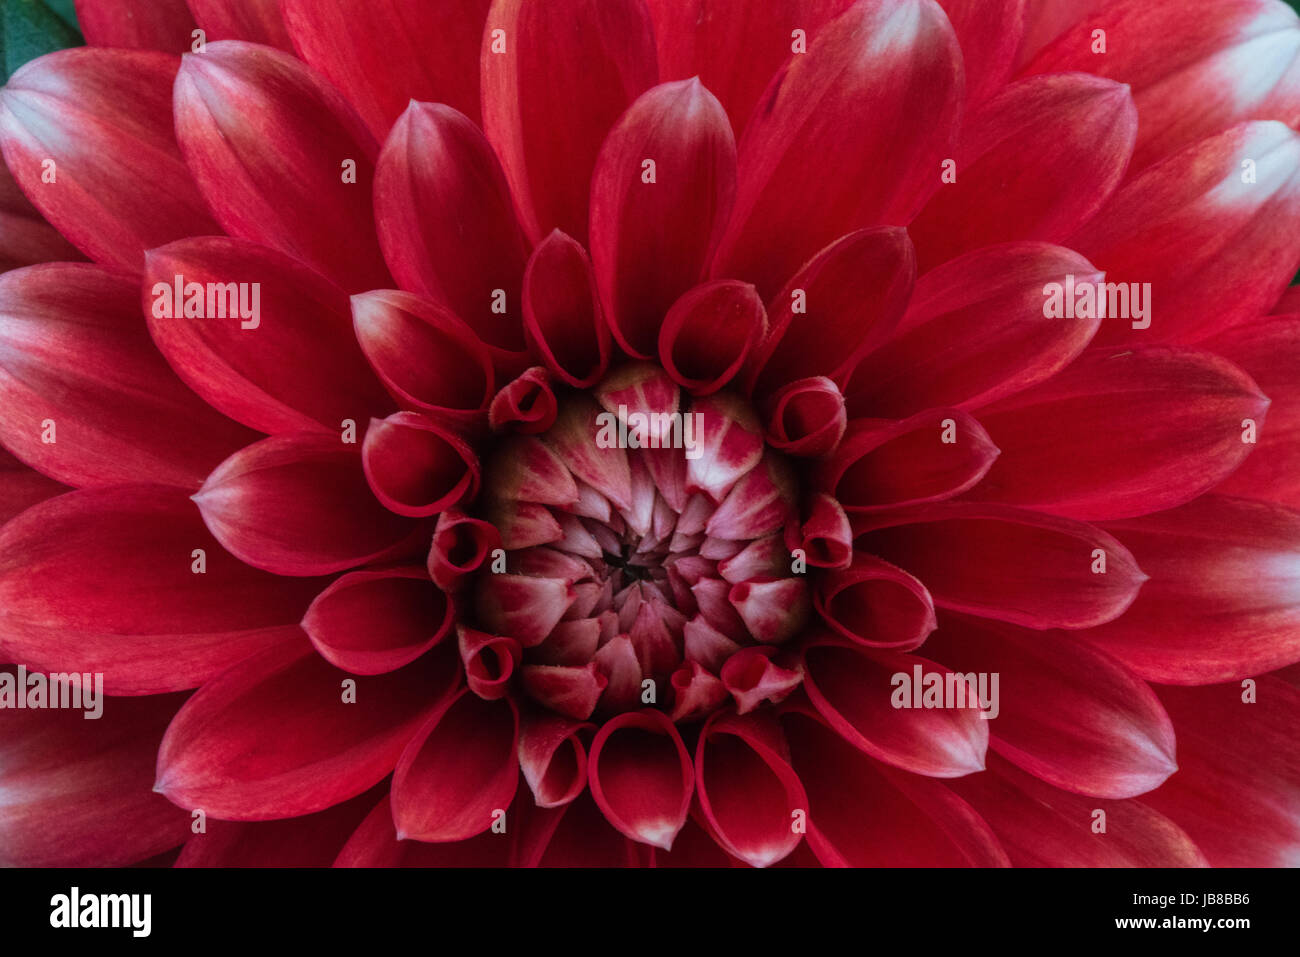 Close-up of the white tipped red flower head of a summer flowering Dahlia in the garden Stock Photo